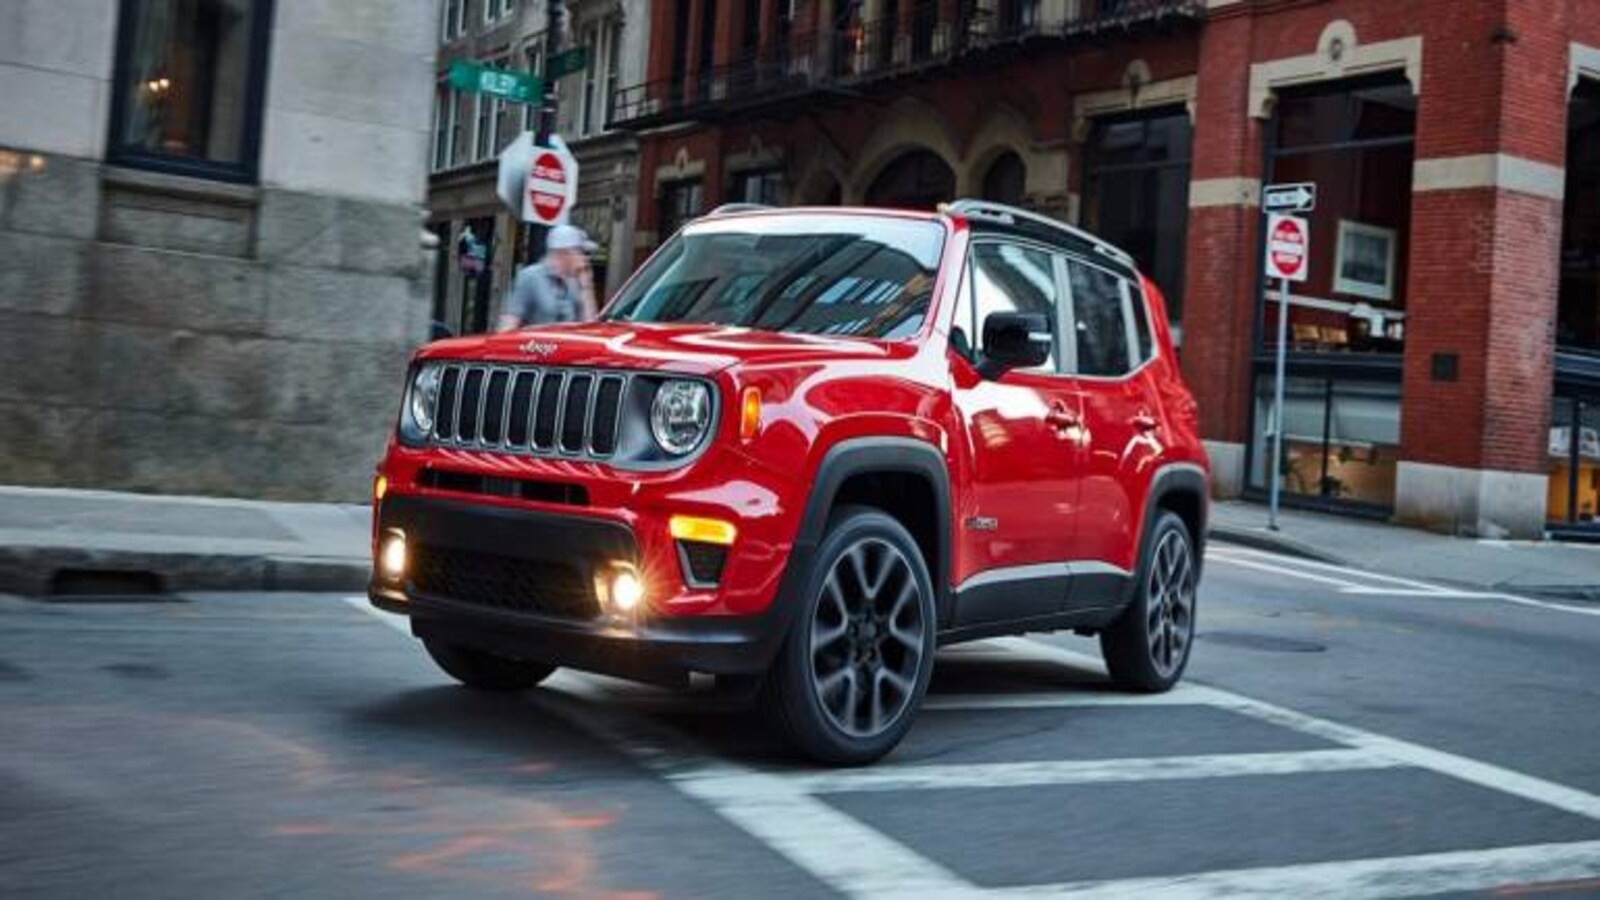 https://images.moneycontrol.com/static-mcnews/2022/11/Jeep-Renegade-770x363.jpg?impolicy=website&width=1600&height=900